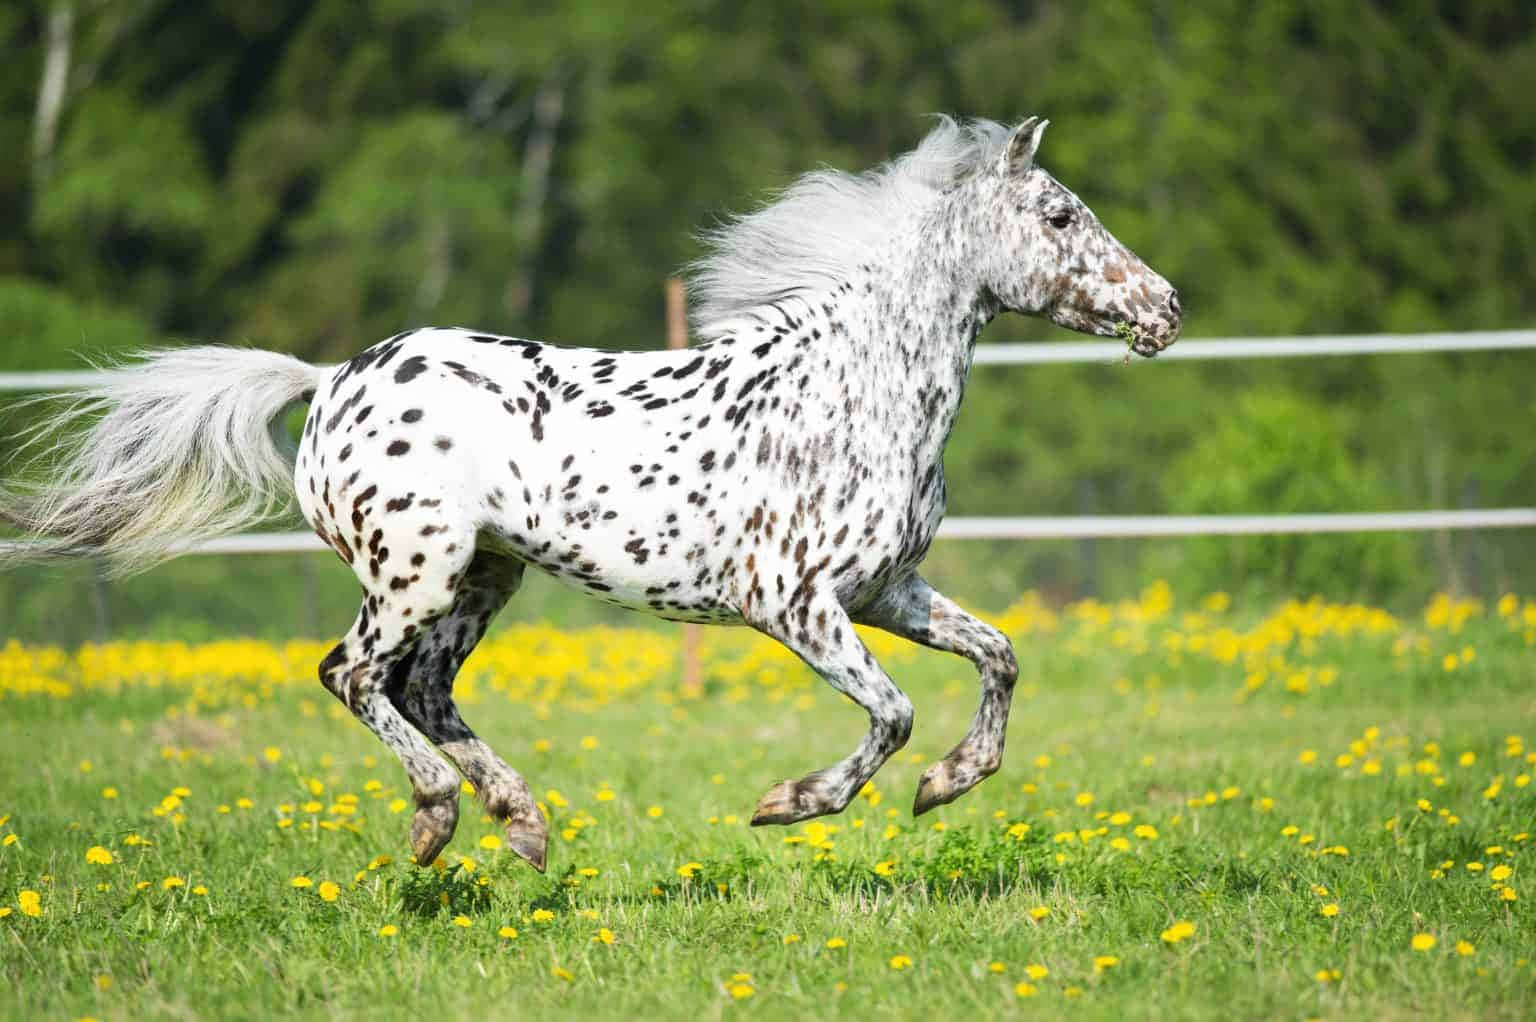 a spotted horse running in a field